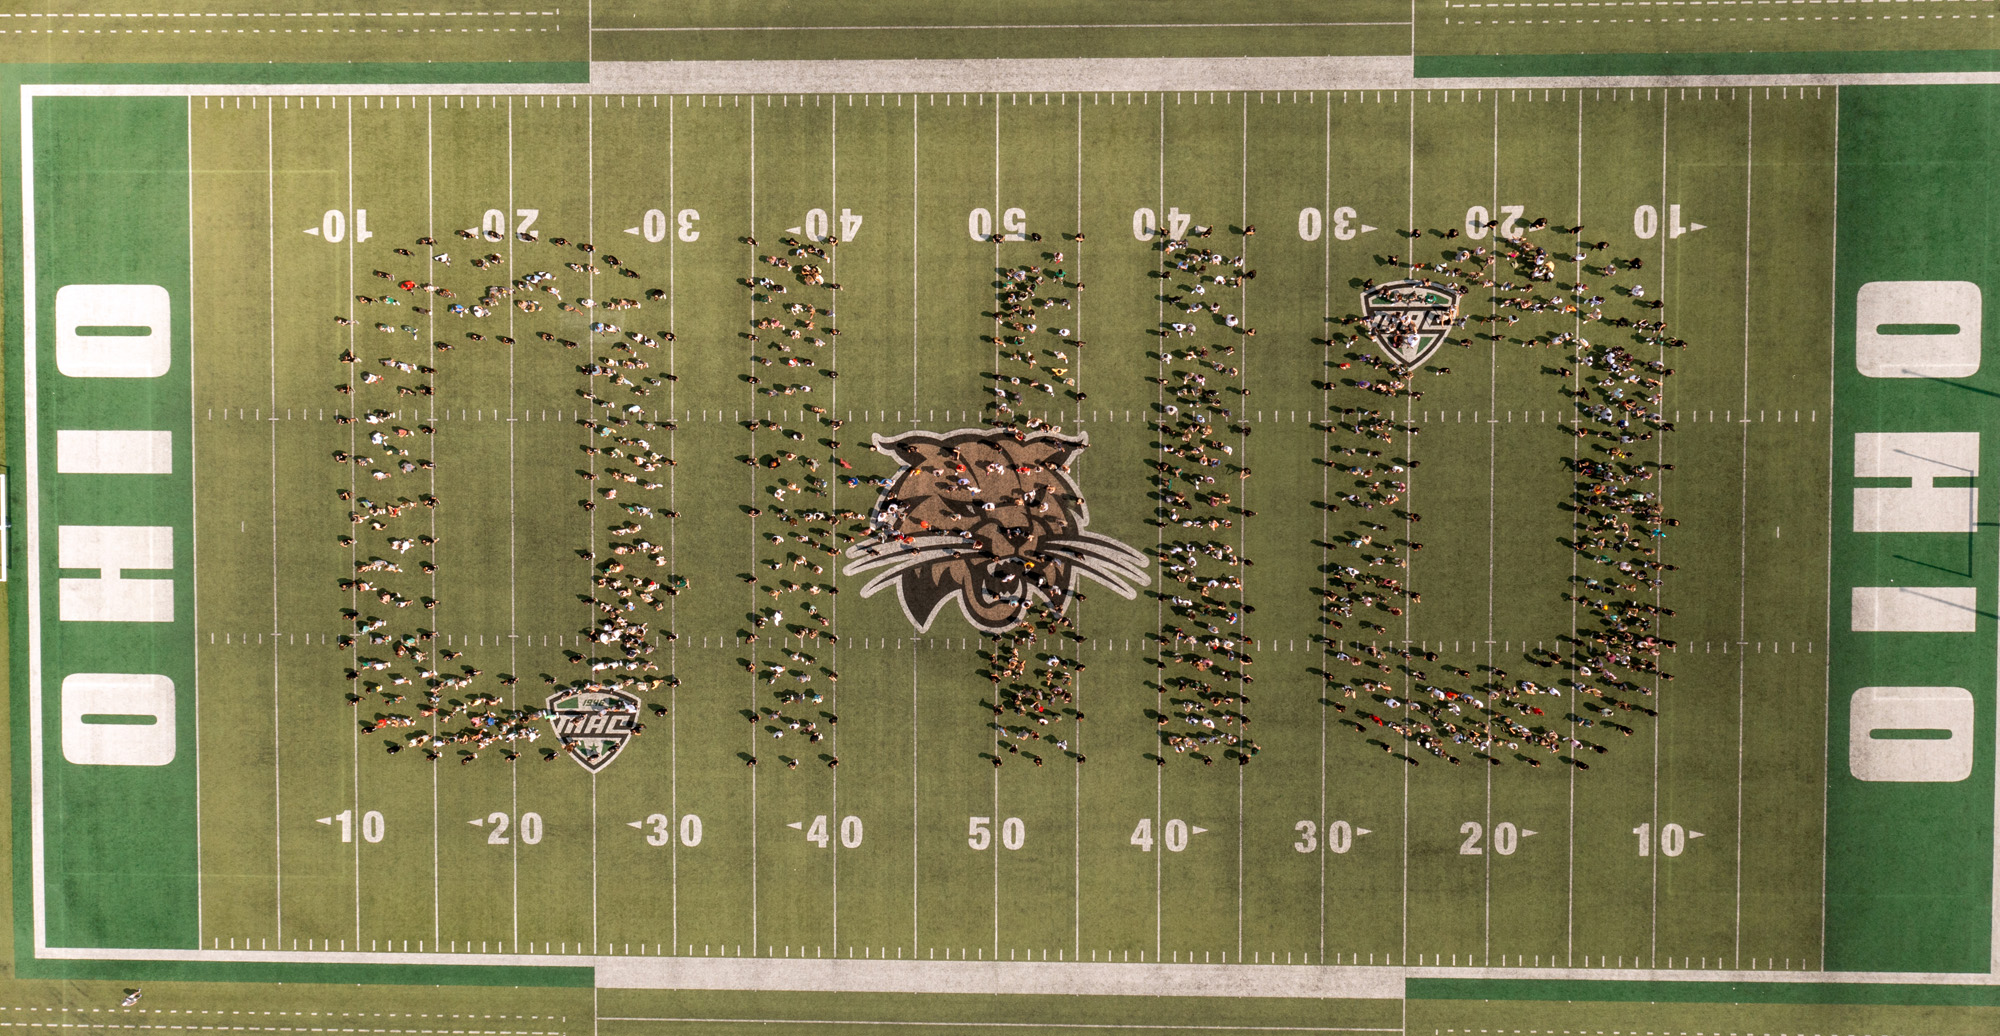 The class of 2024 organized in the shape of OHIO as seen from a drone